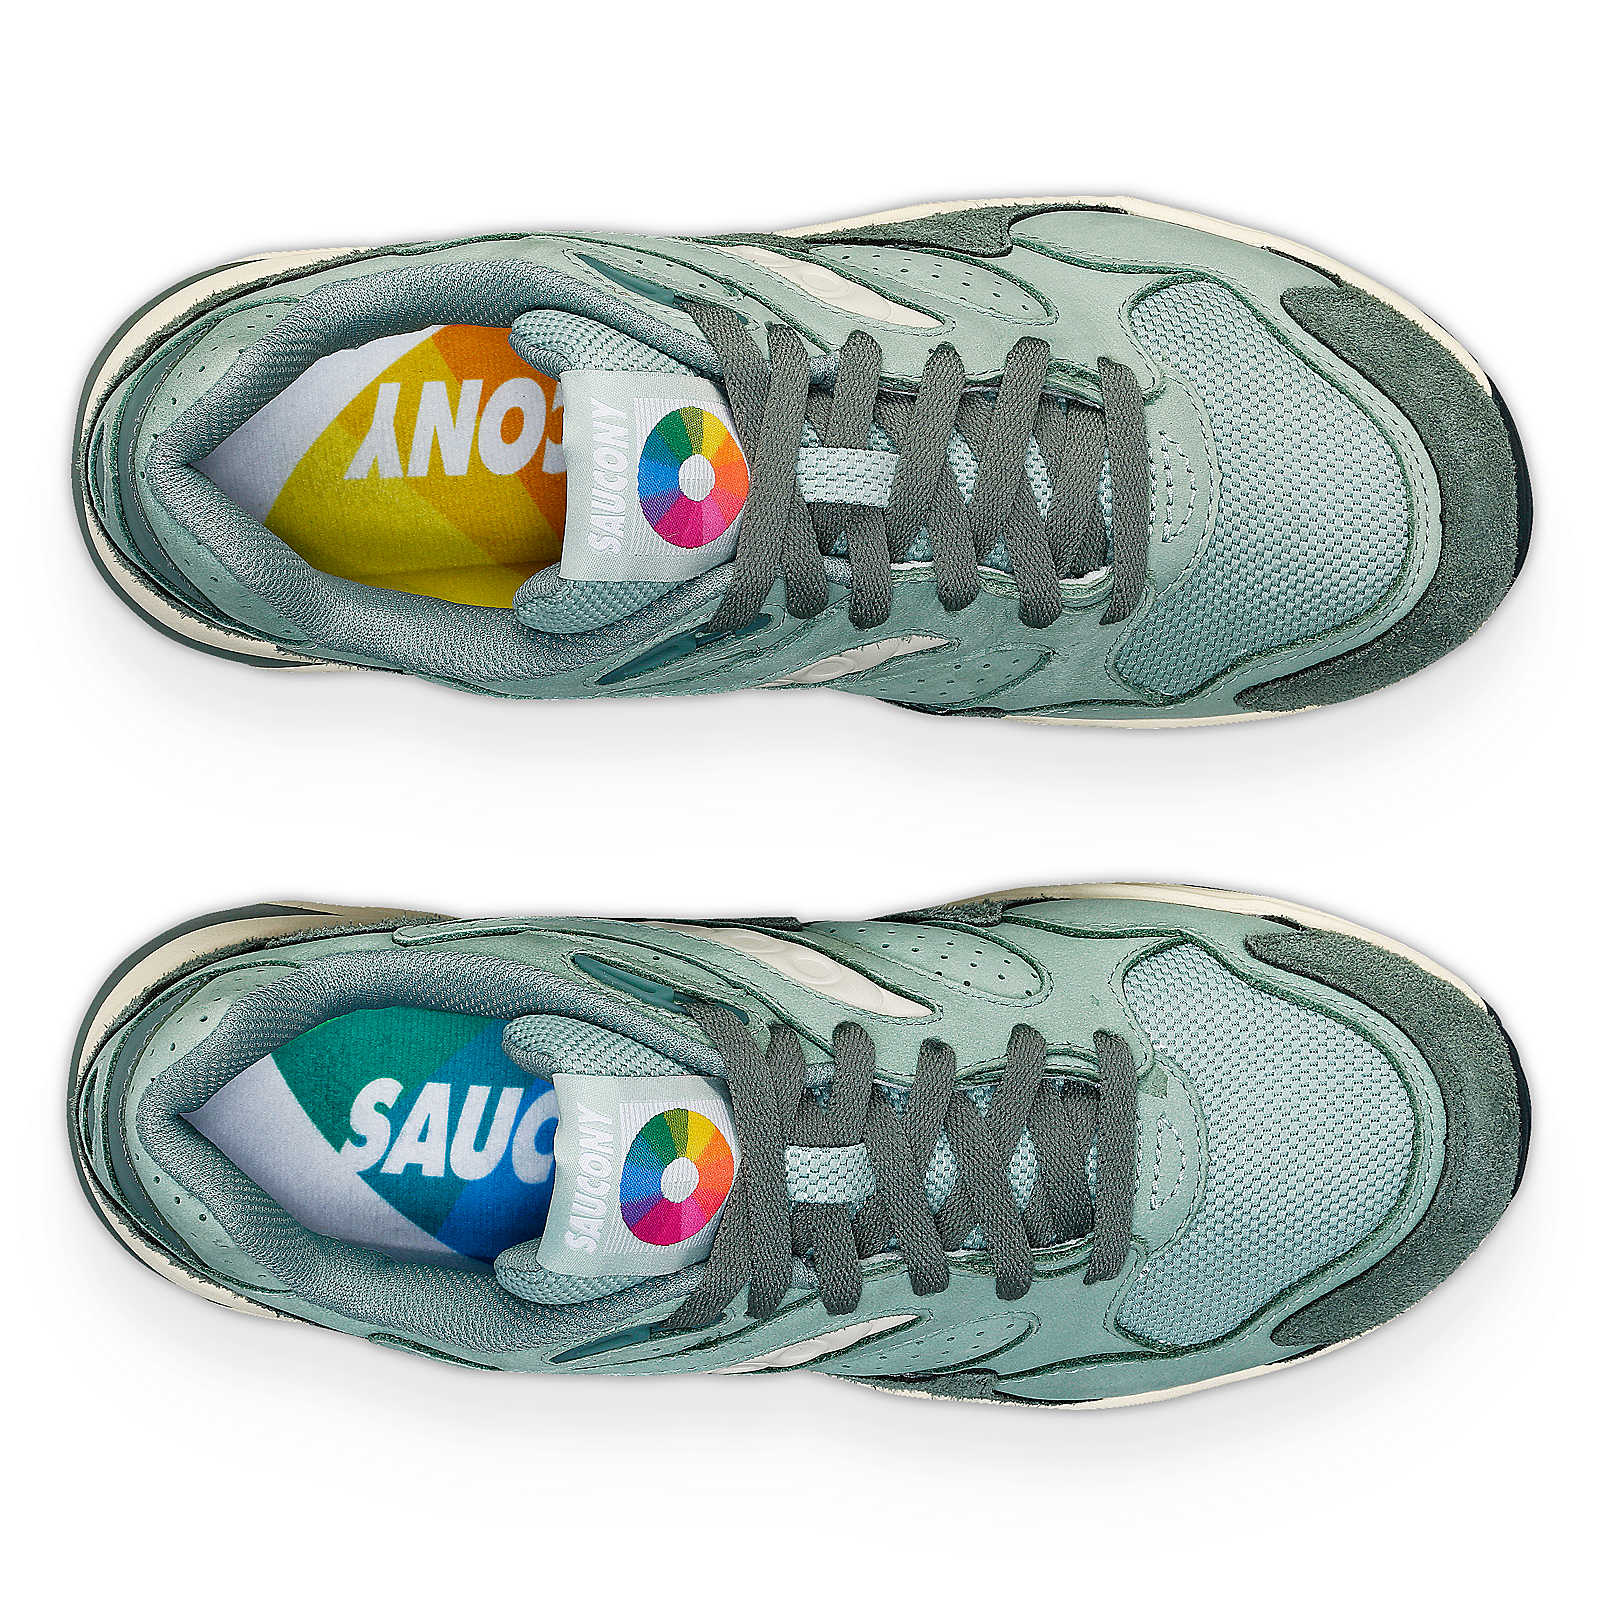 Last month END and s10681-20 Saucony dropped the White Noise Chromatic Sage 5